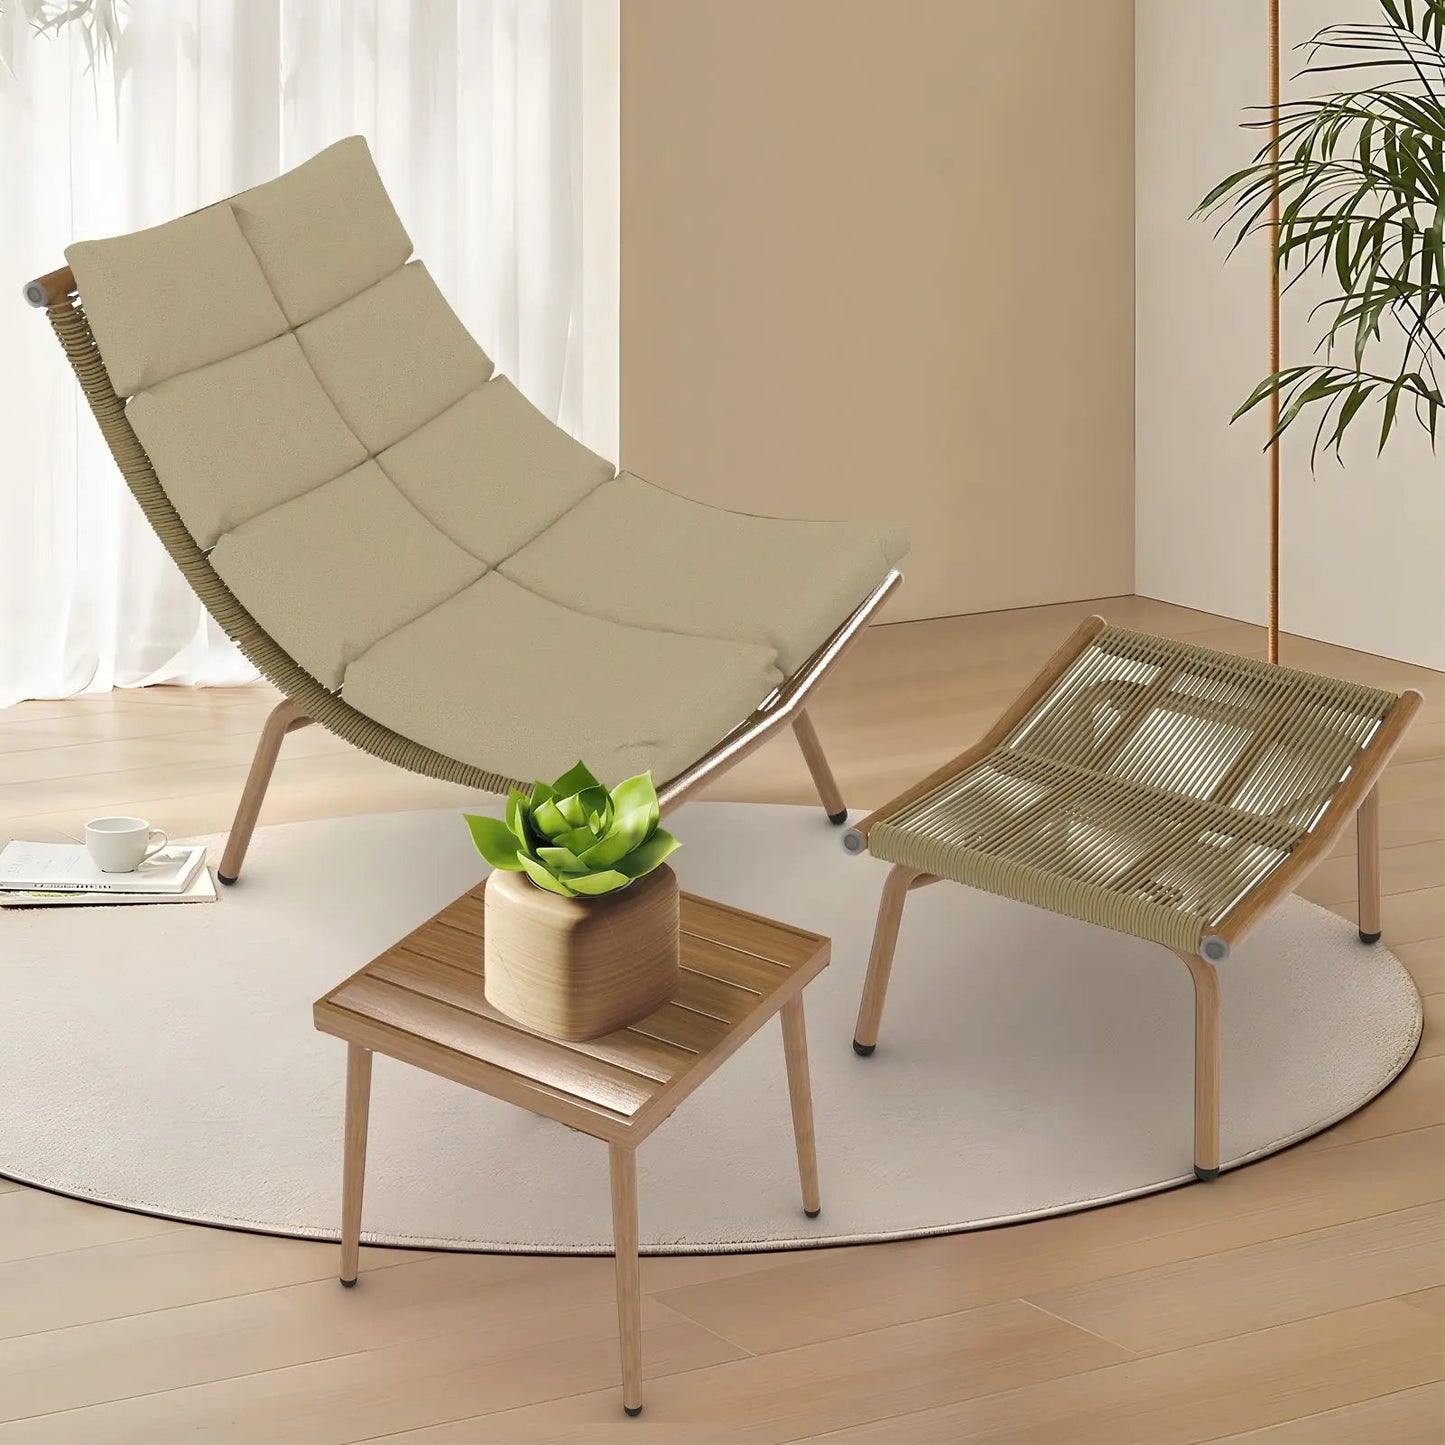 MLNshops - Chaise Lounge Chair with Table for Outdoor Indoor 